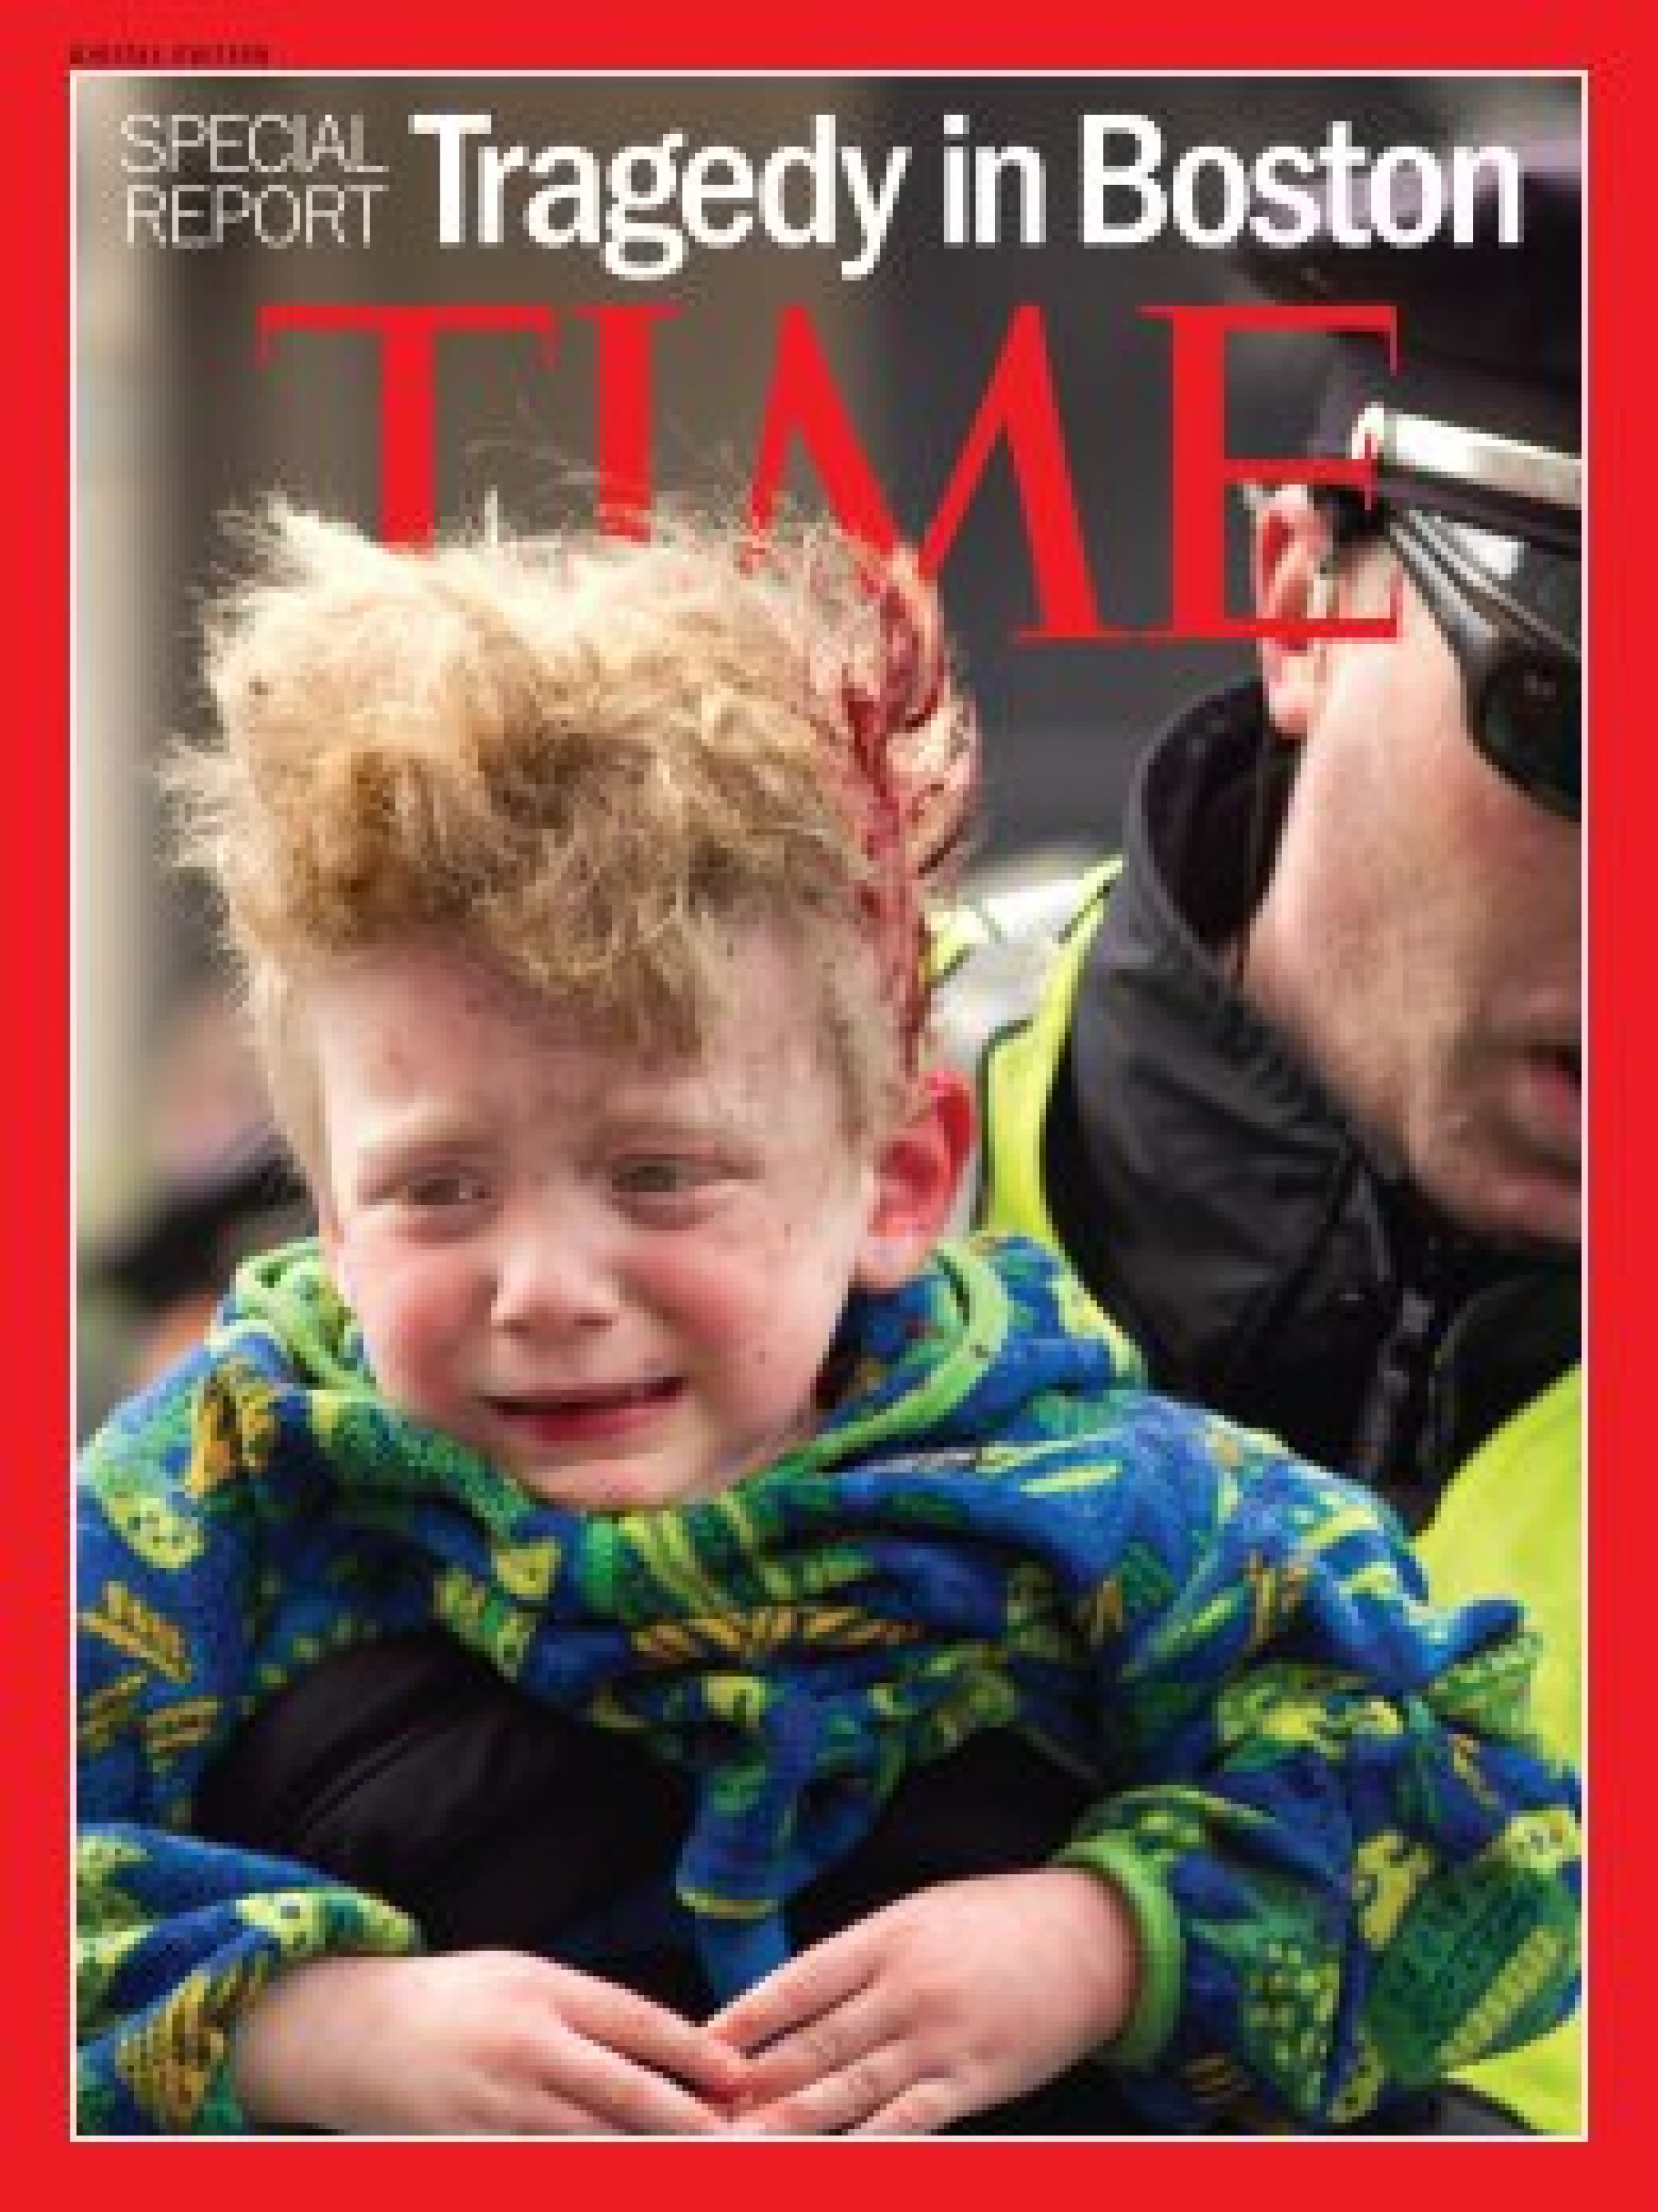 Time Magazine Cover Shows Nameless And Bloodied Child Amid Boston